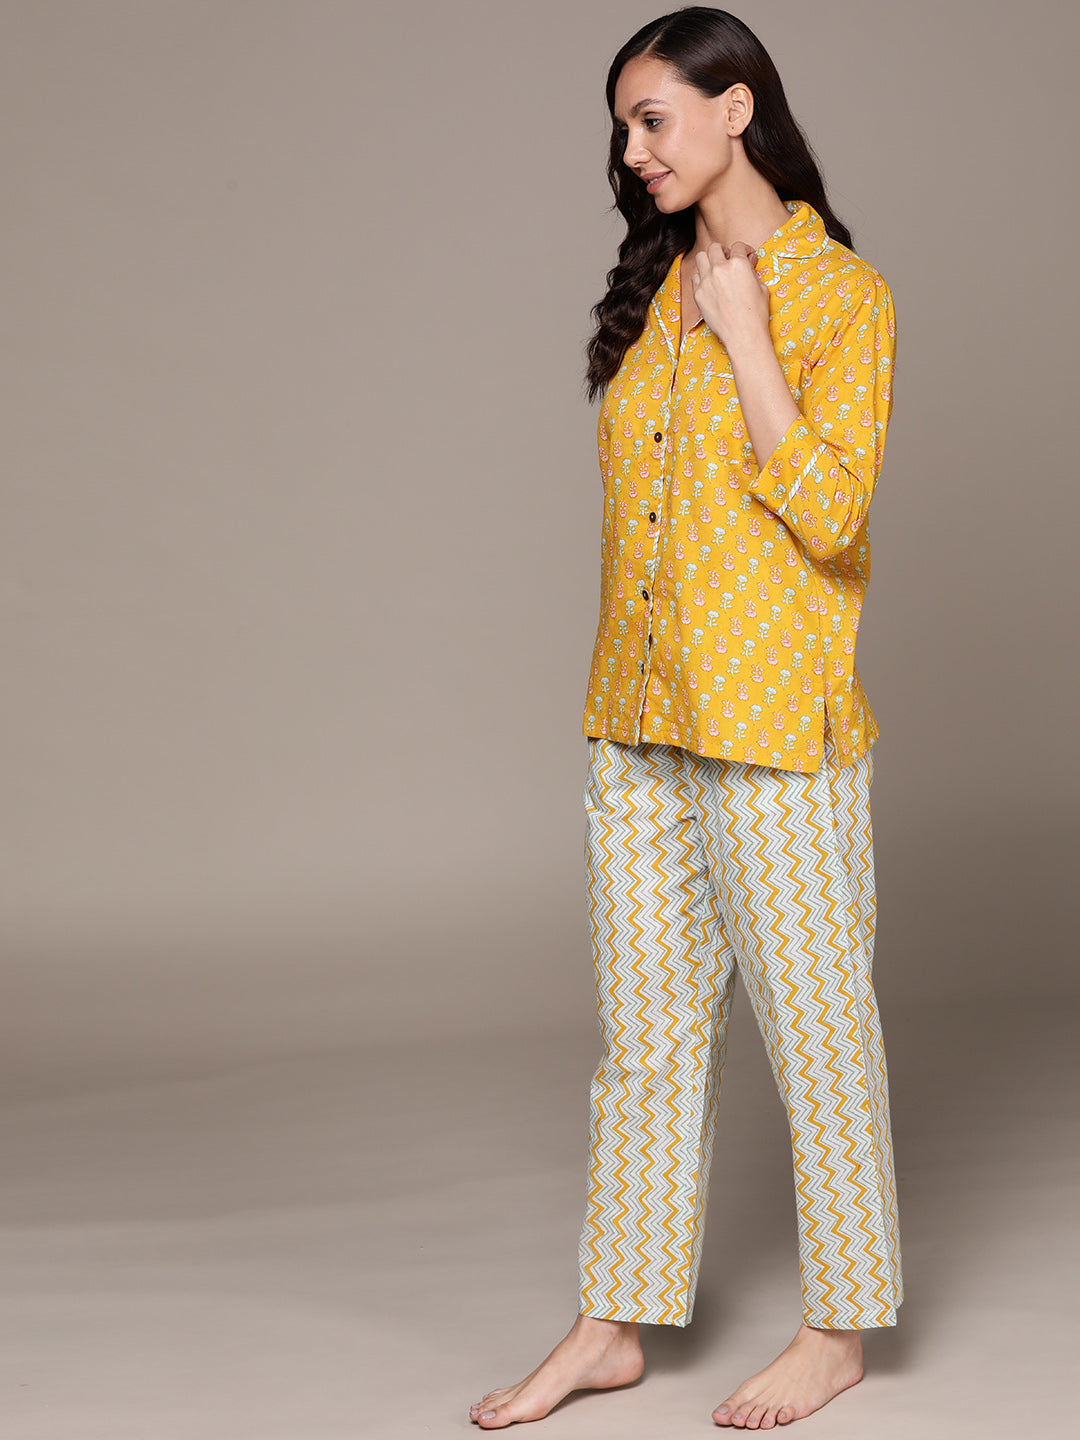 Women's's Mustard Floral Printed Pure Cotton Night Suit